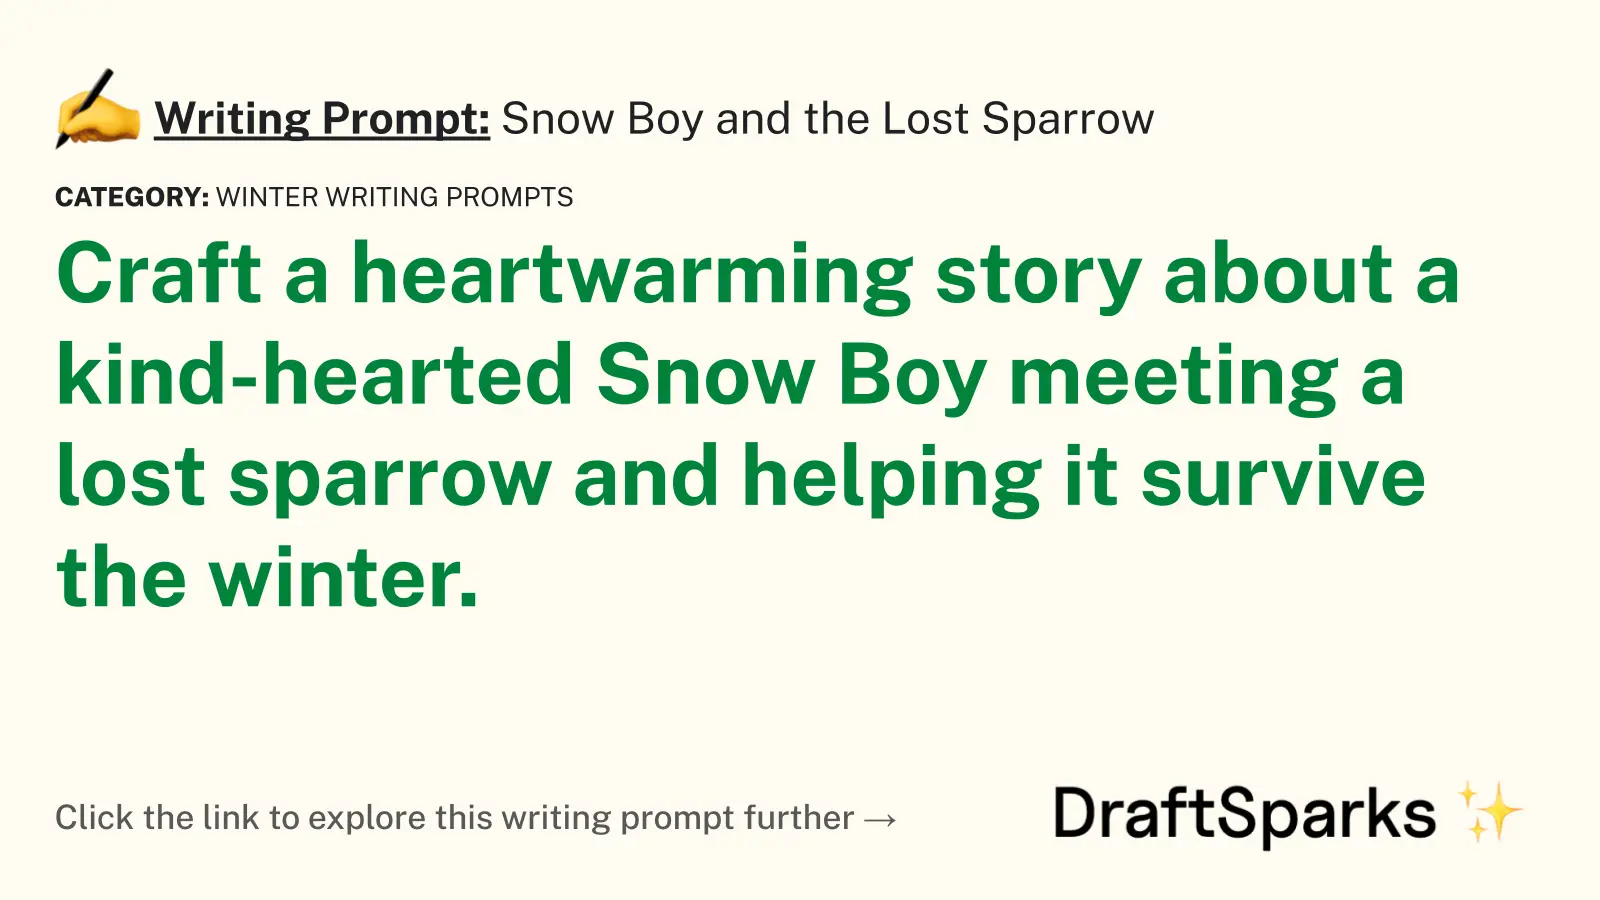 Snow Boy and the Lost Sparrow